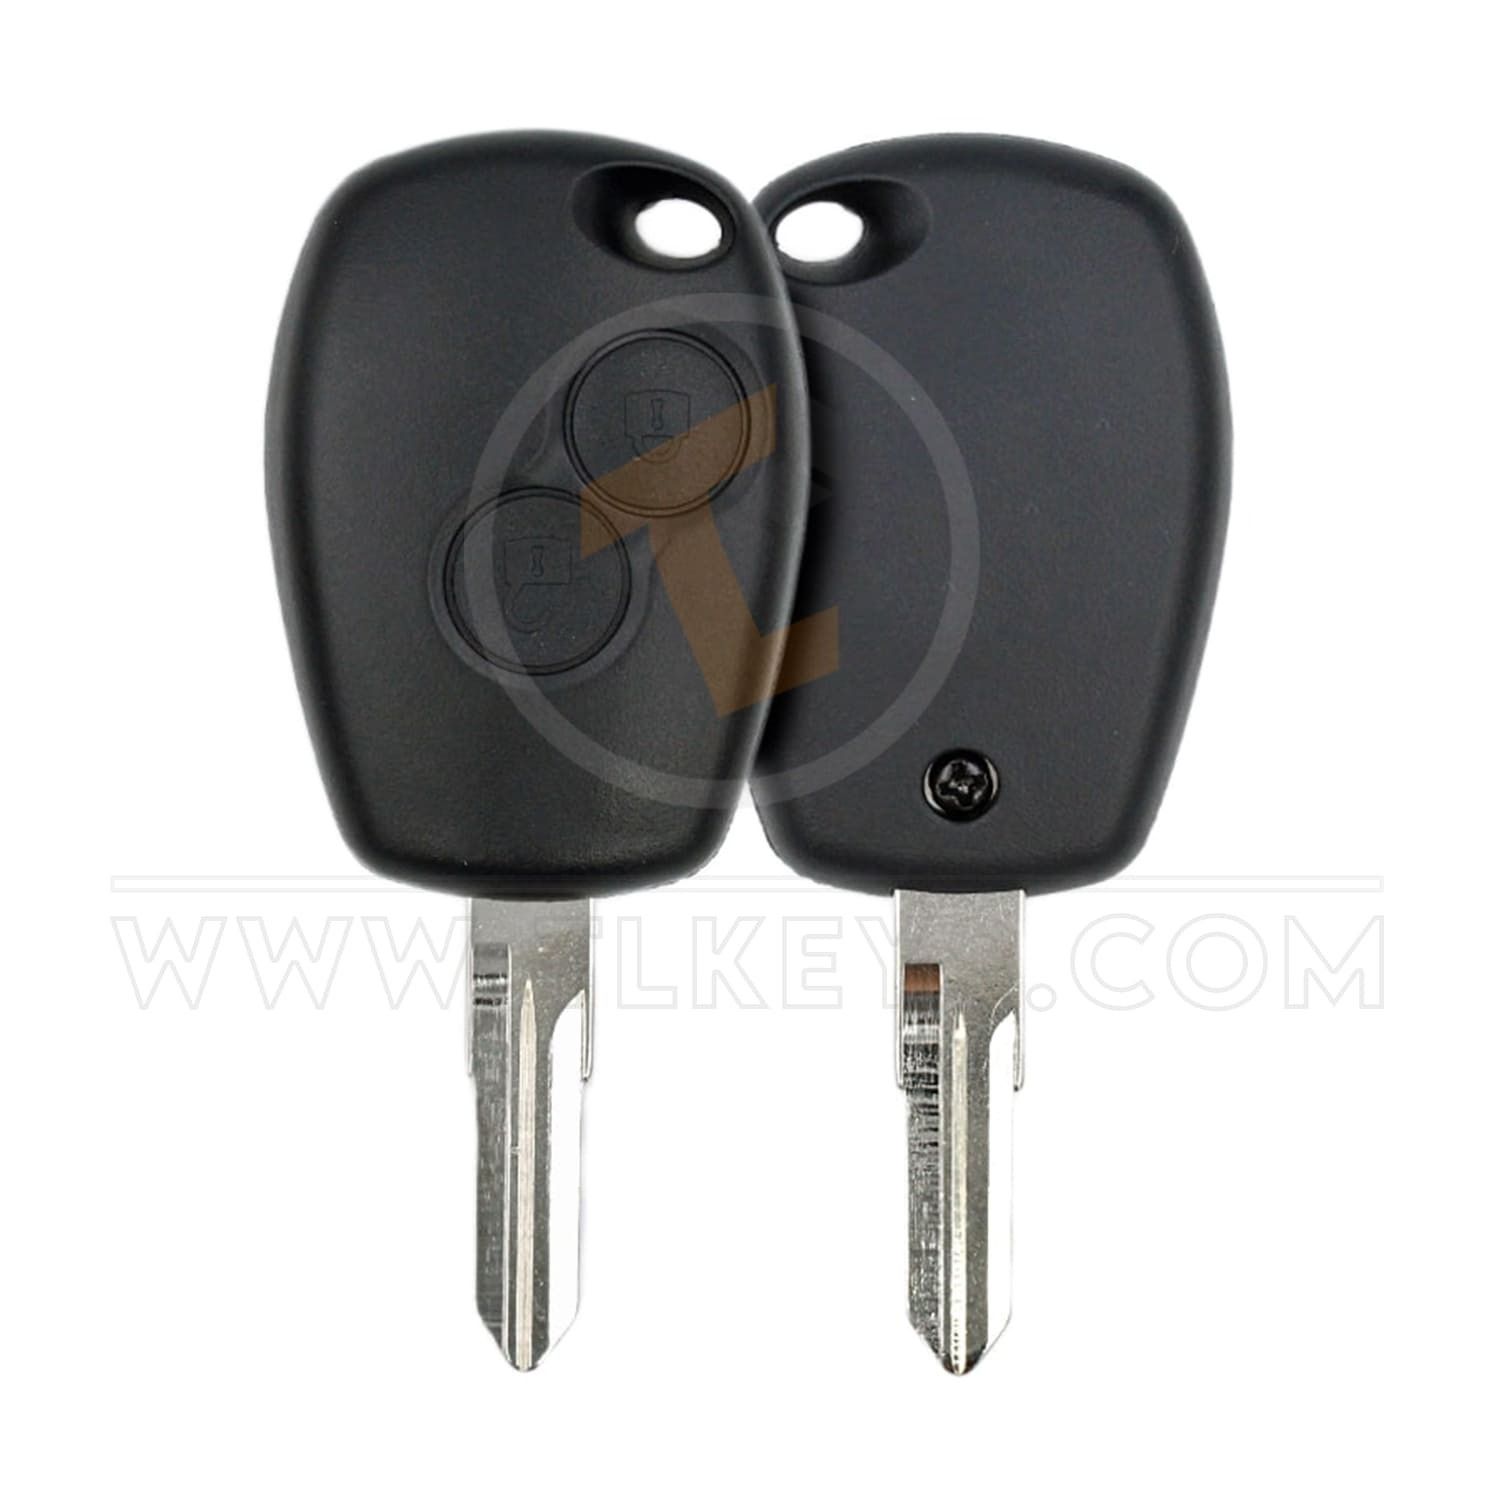  Renault Duster Clio Head Key Remote 2000 2003 433MHz 2 Buttons Buttons 2